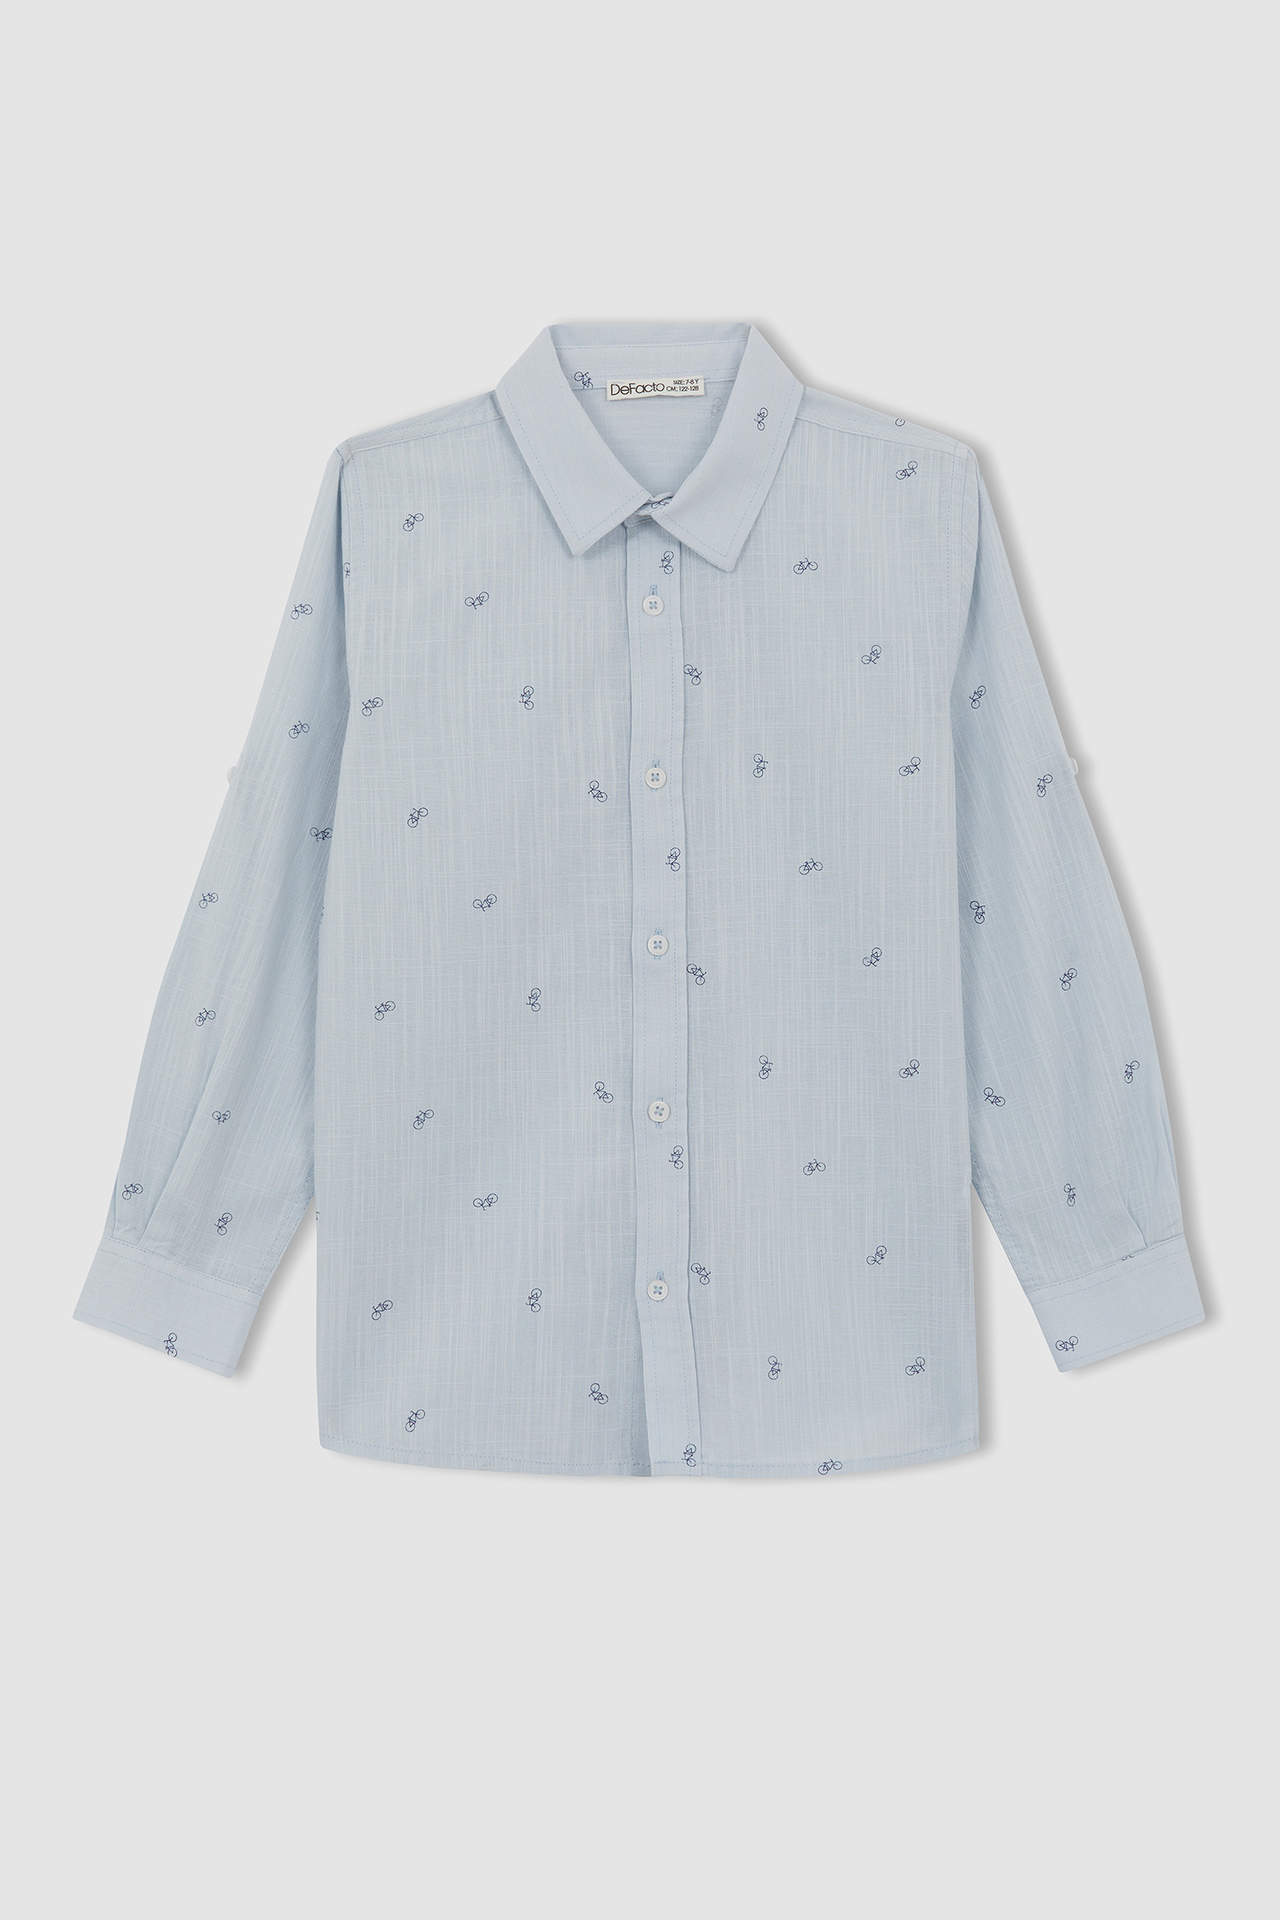 DEFACTO Boy Cotton Sustainable Long Sleeve Shirt